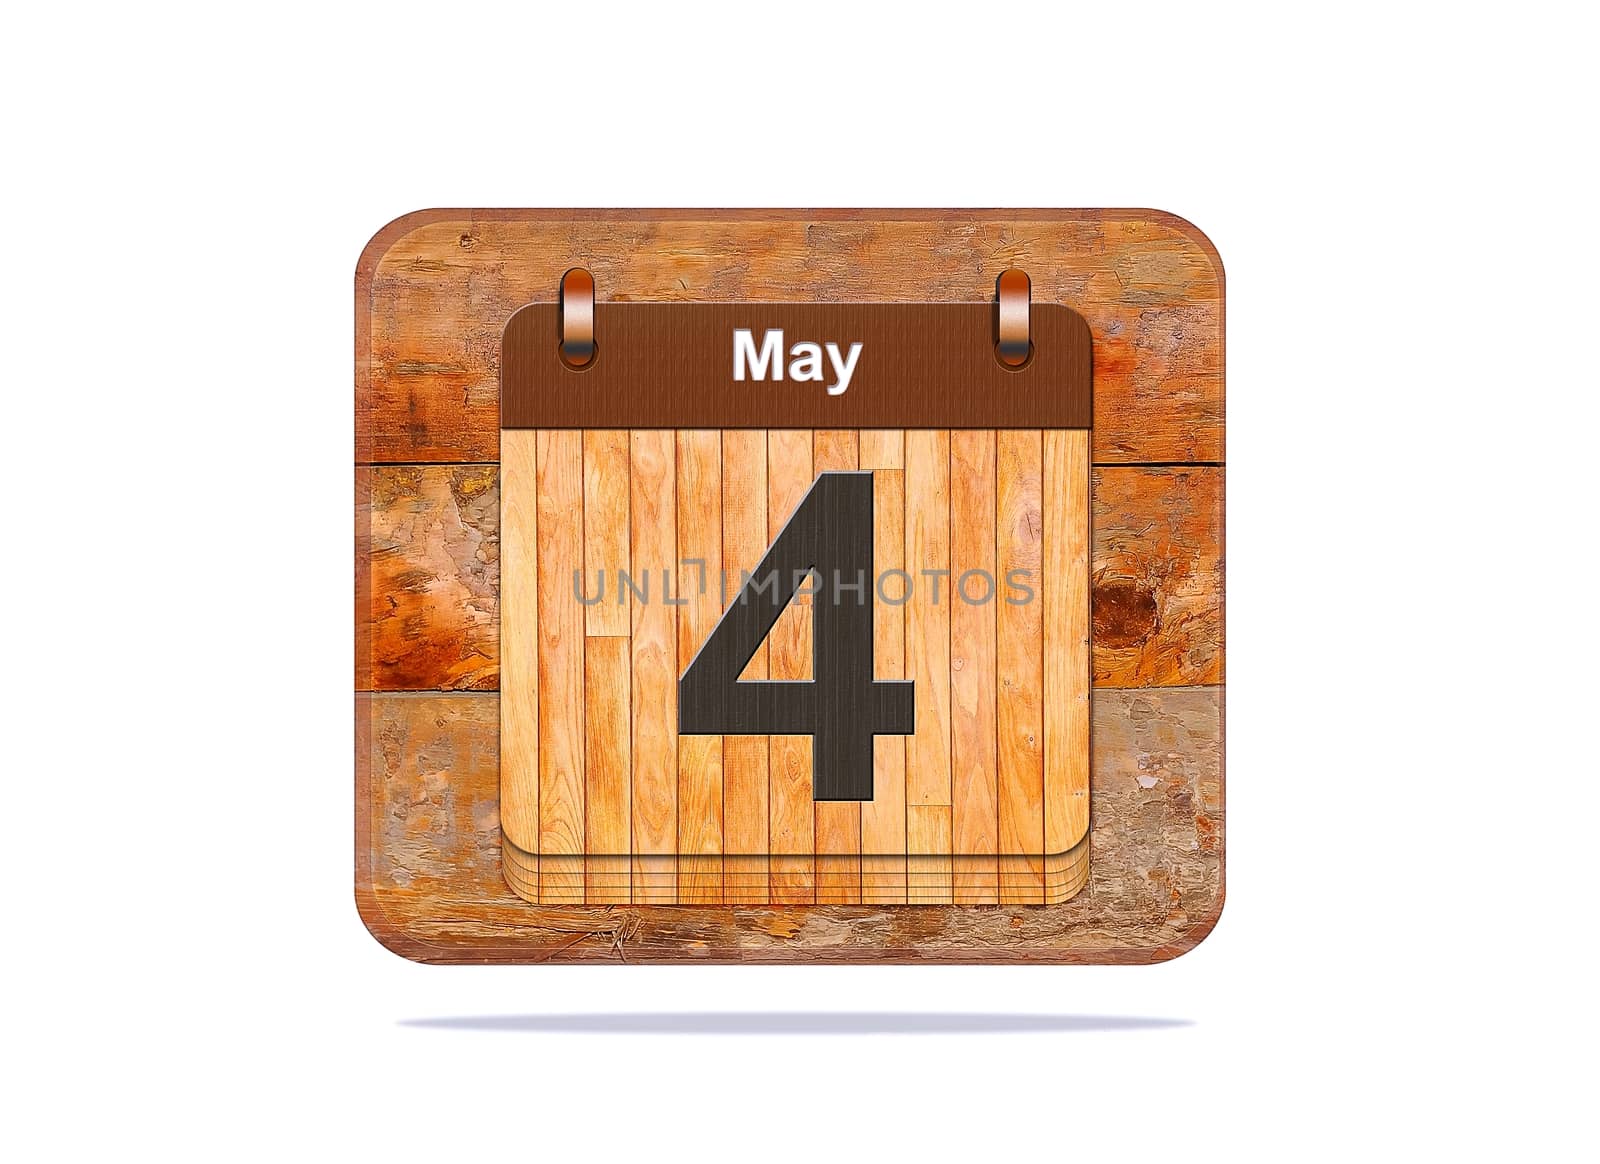 Calendar with the date of May 4.